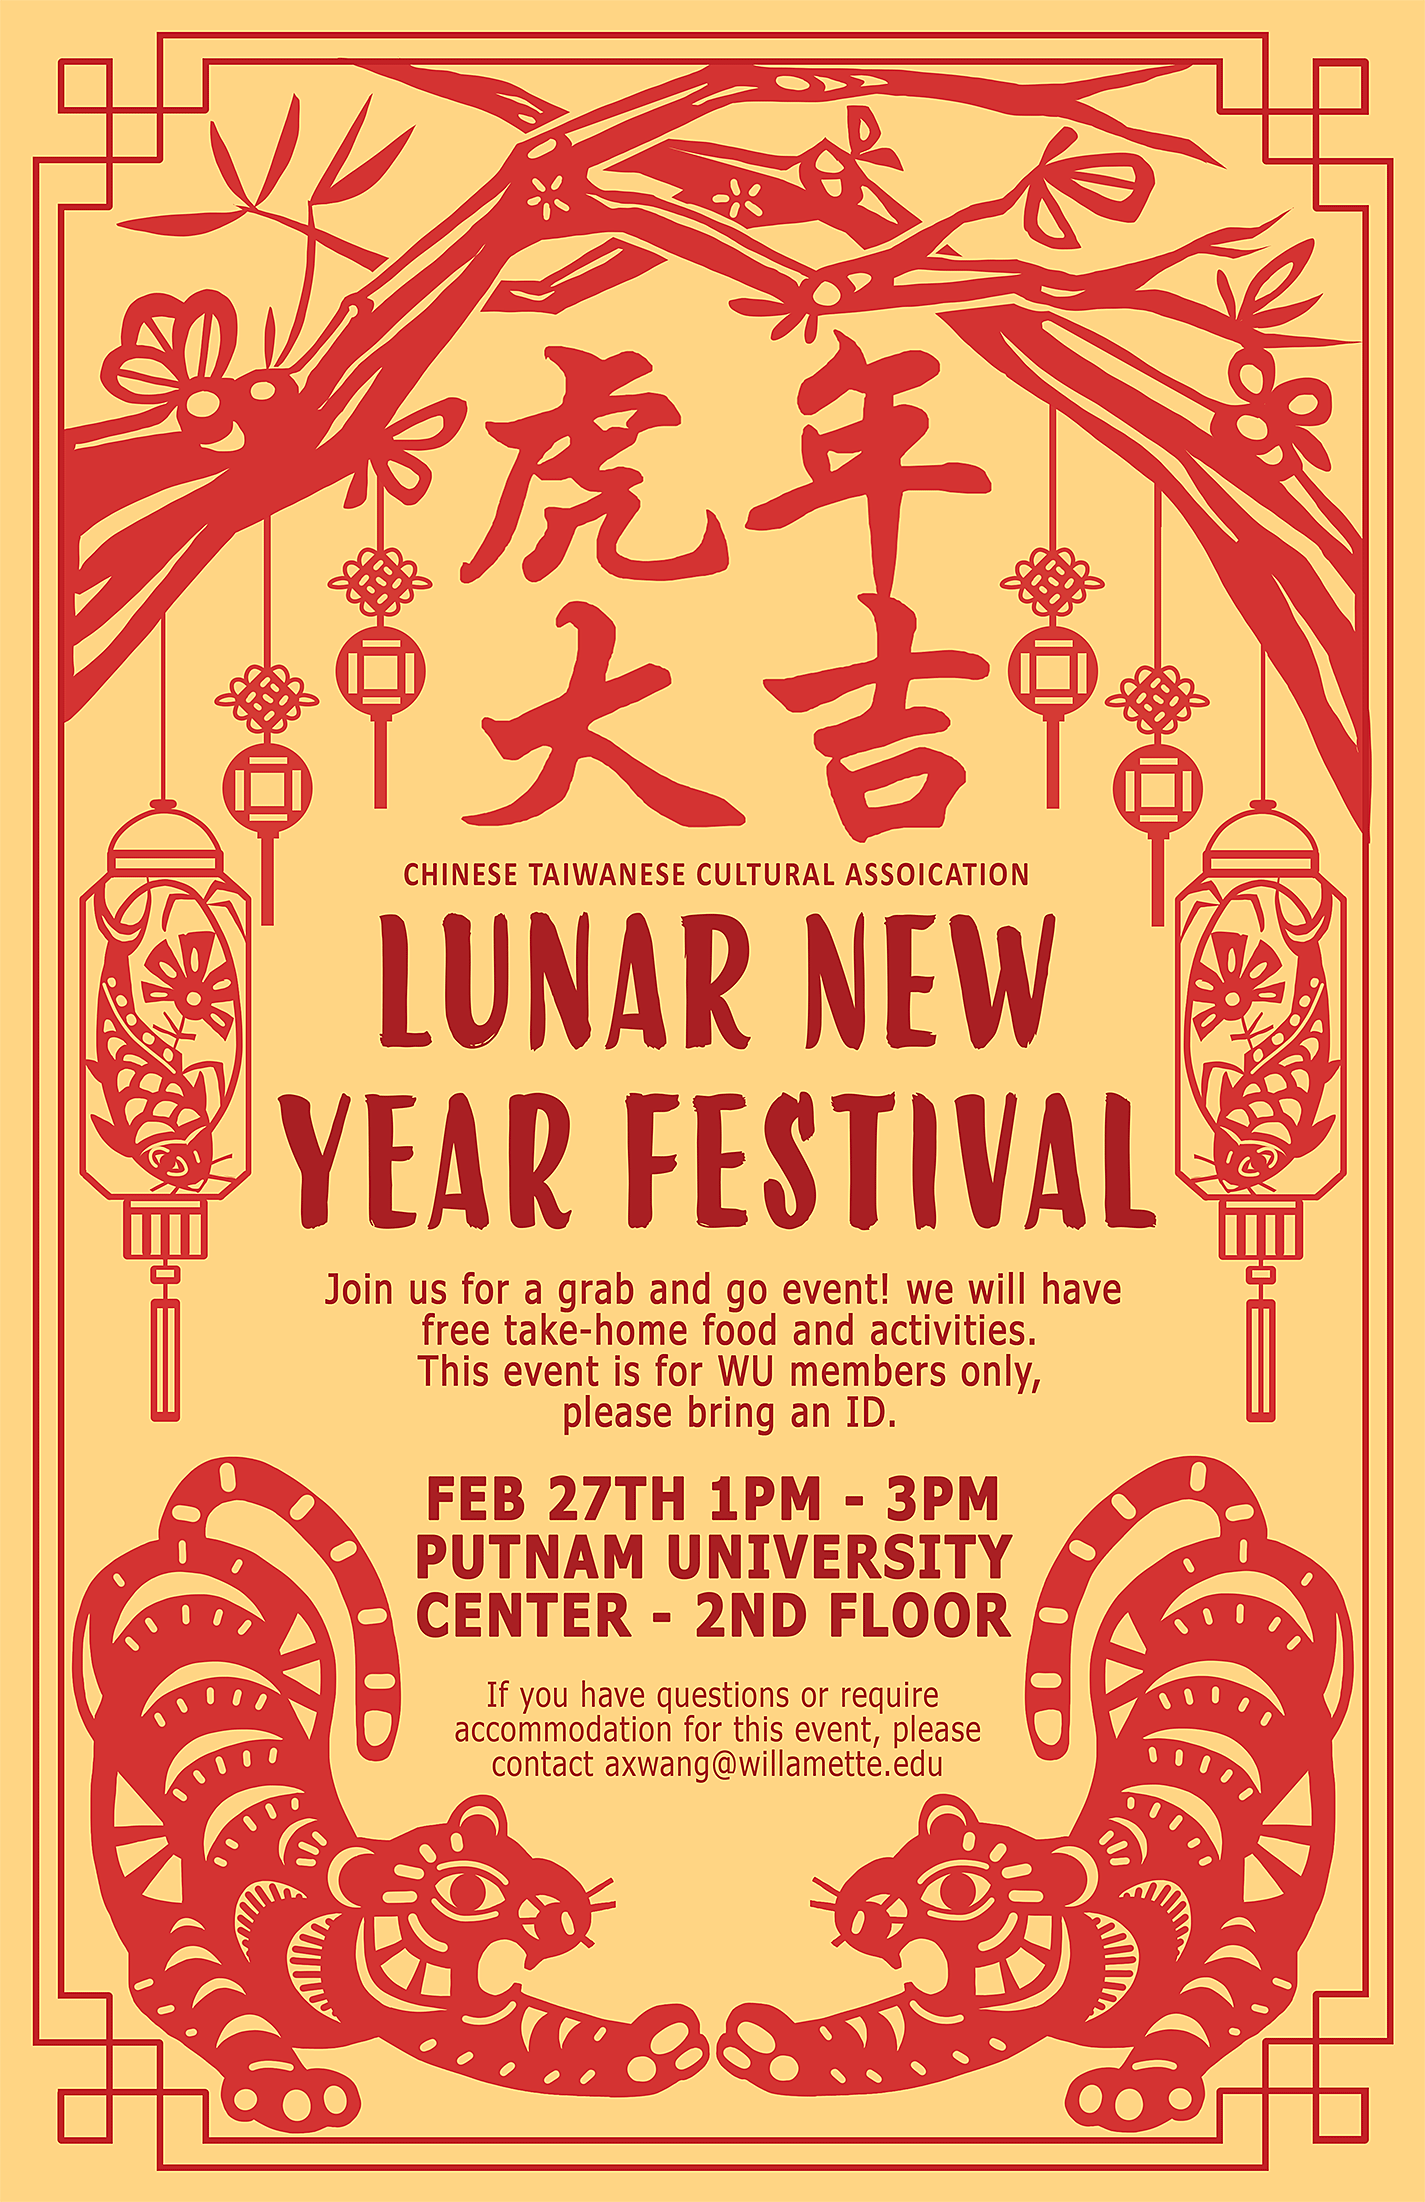 Lunar New Year inspired poster with lanterns and tigers.